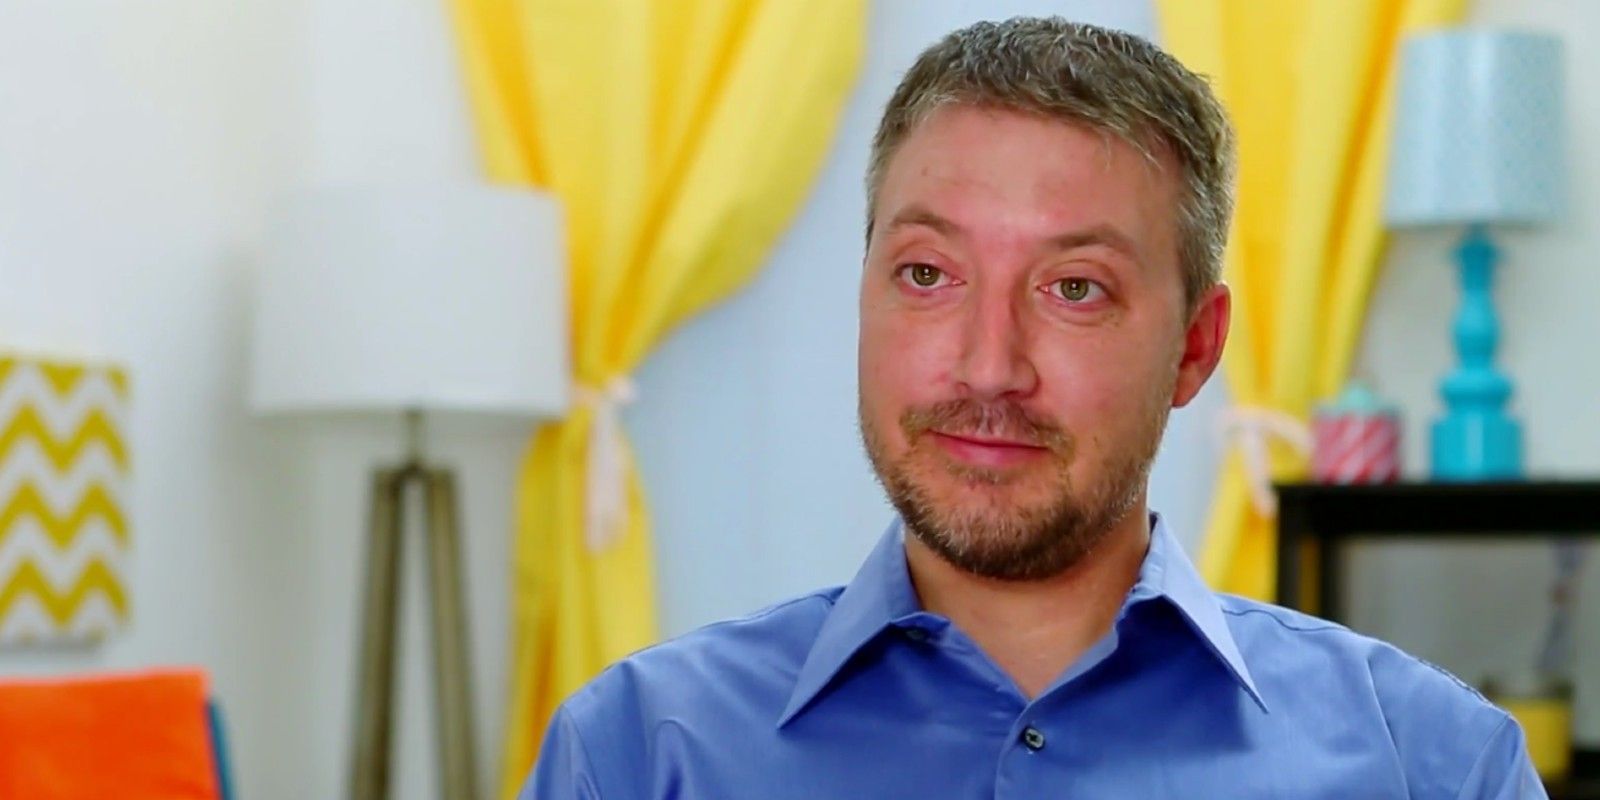 90 Day Fiancé: Season 2 Star Jason Hitch Dies From COVID-19 Issues